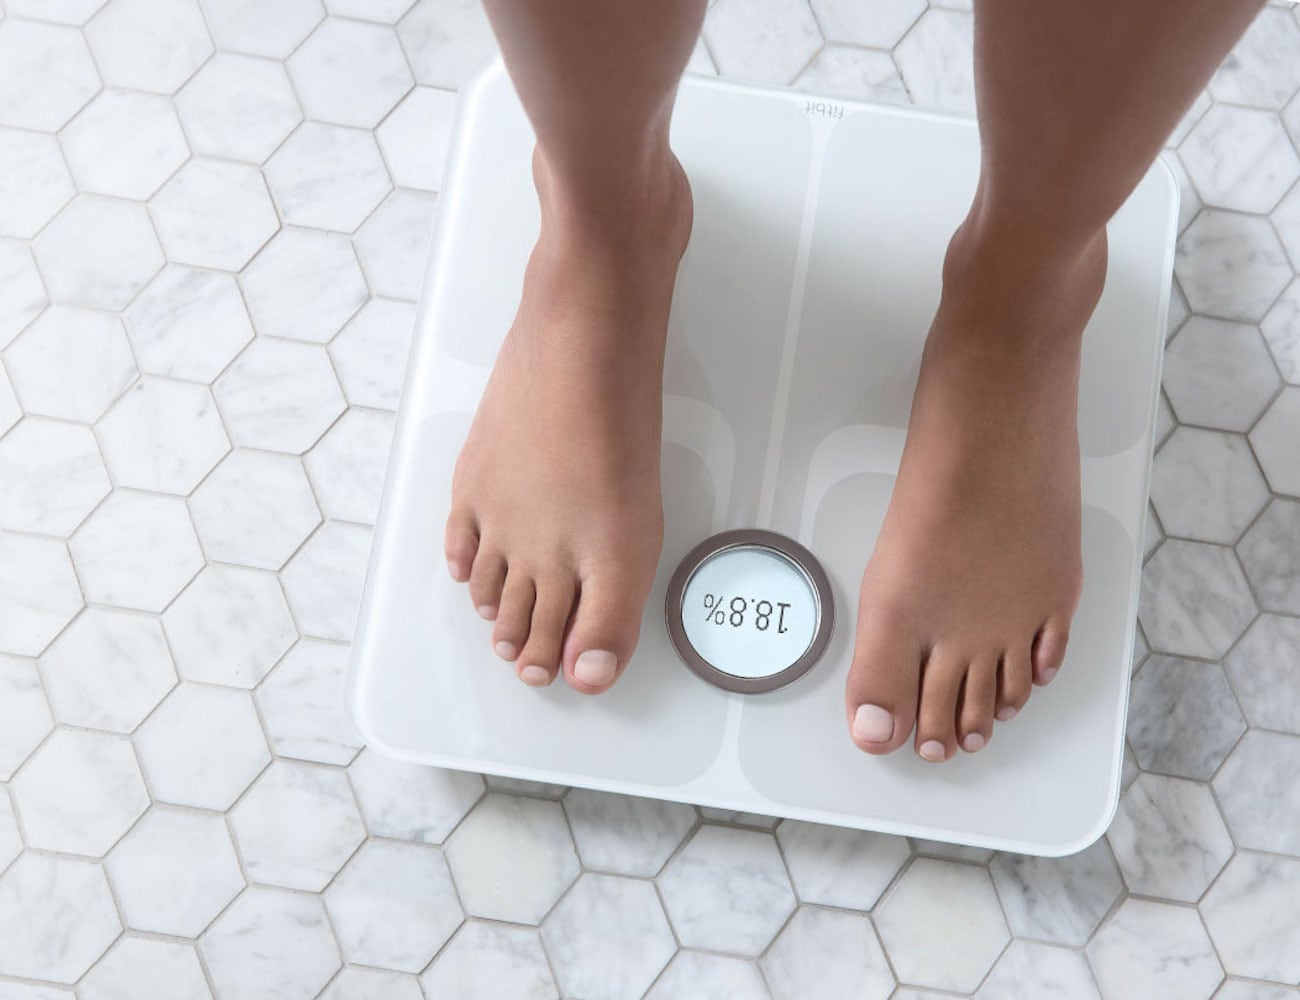 Fitbit Aria 2 Wi-Fi Smart Scale measure more than just your weight